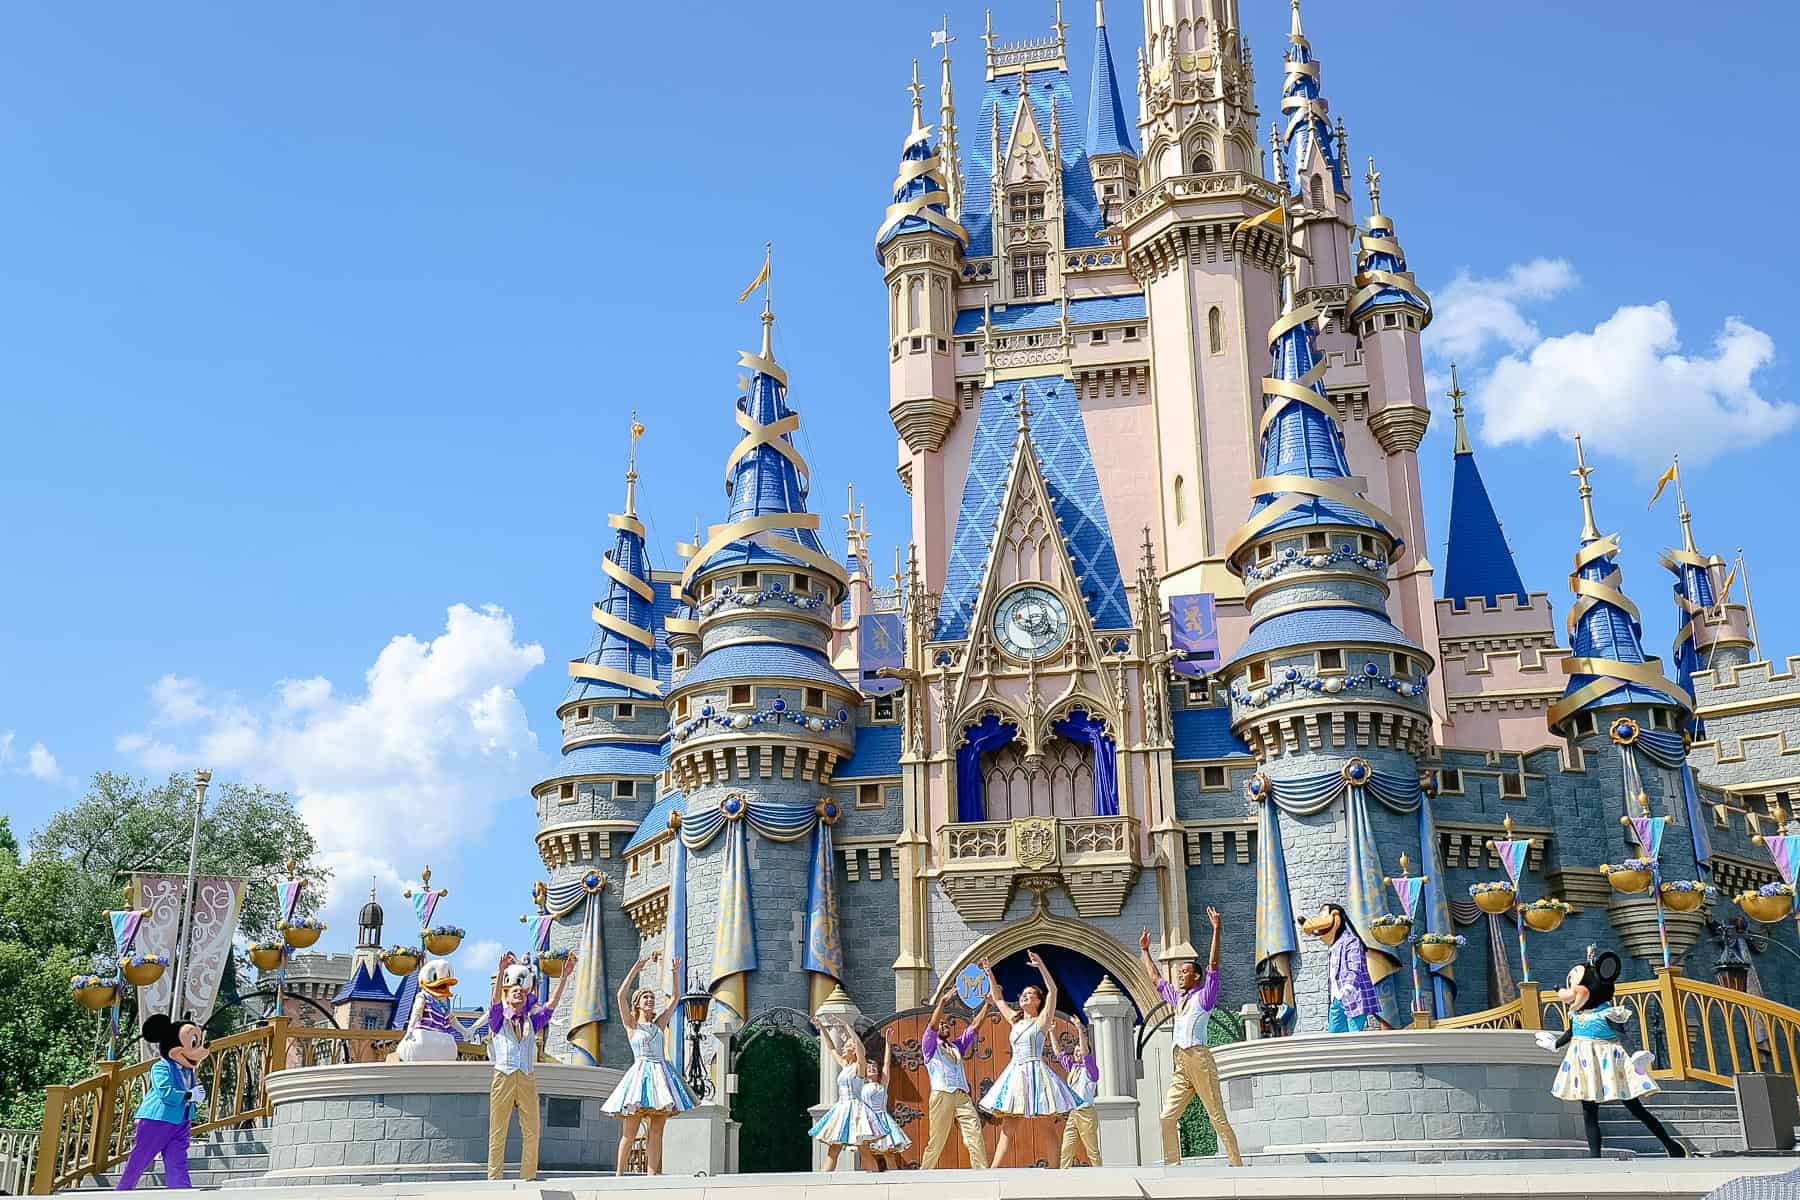 Show held multiple times daily on the stage of Cinderella Castle. 